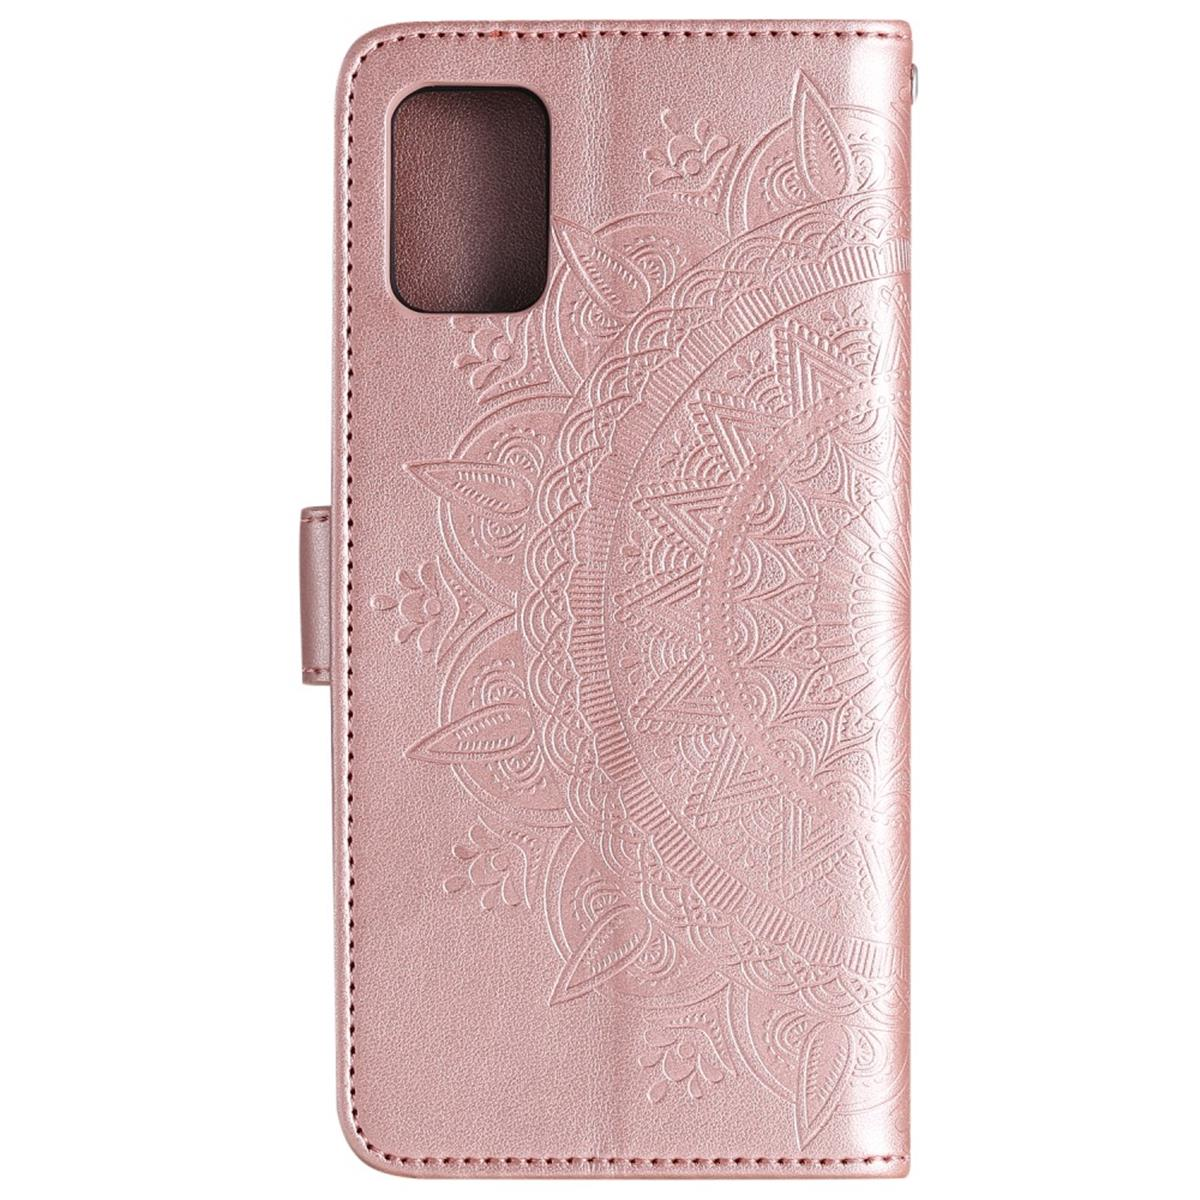 Klapphülle Muster, Galaxy Roségold COVERKINGZ mit A31, Samsung, Mandala Bookcover,